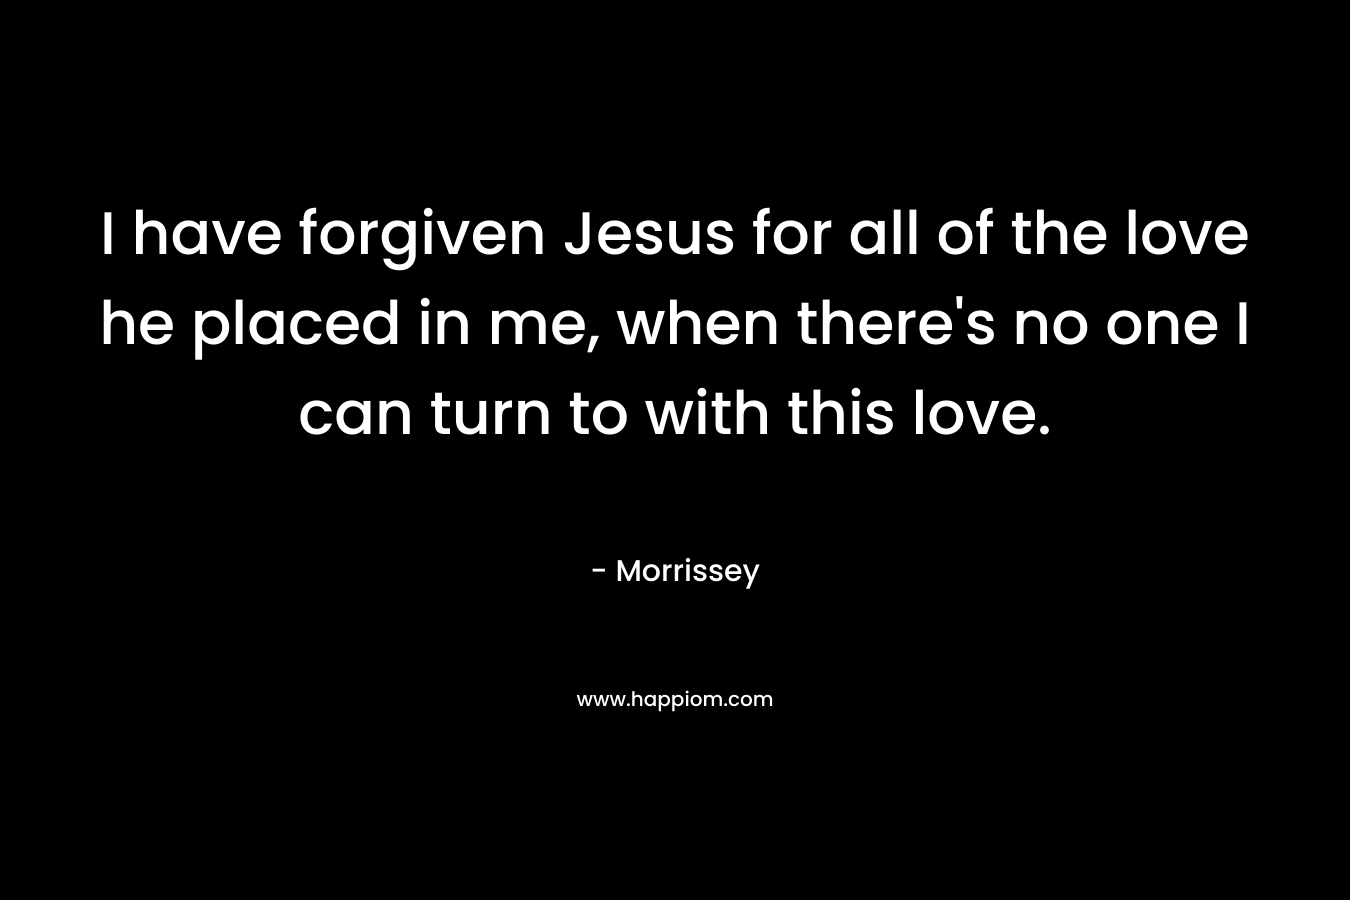 I have forgiven Jesus for all of the love he placed in me, when there’s no one I can turn to with this love. – Morrissey